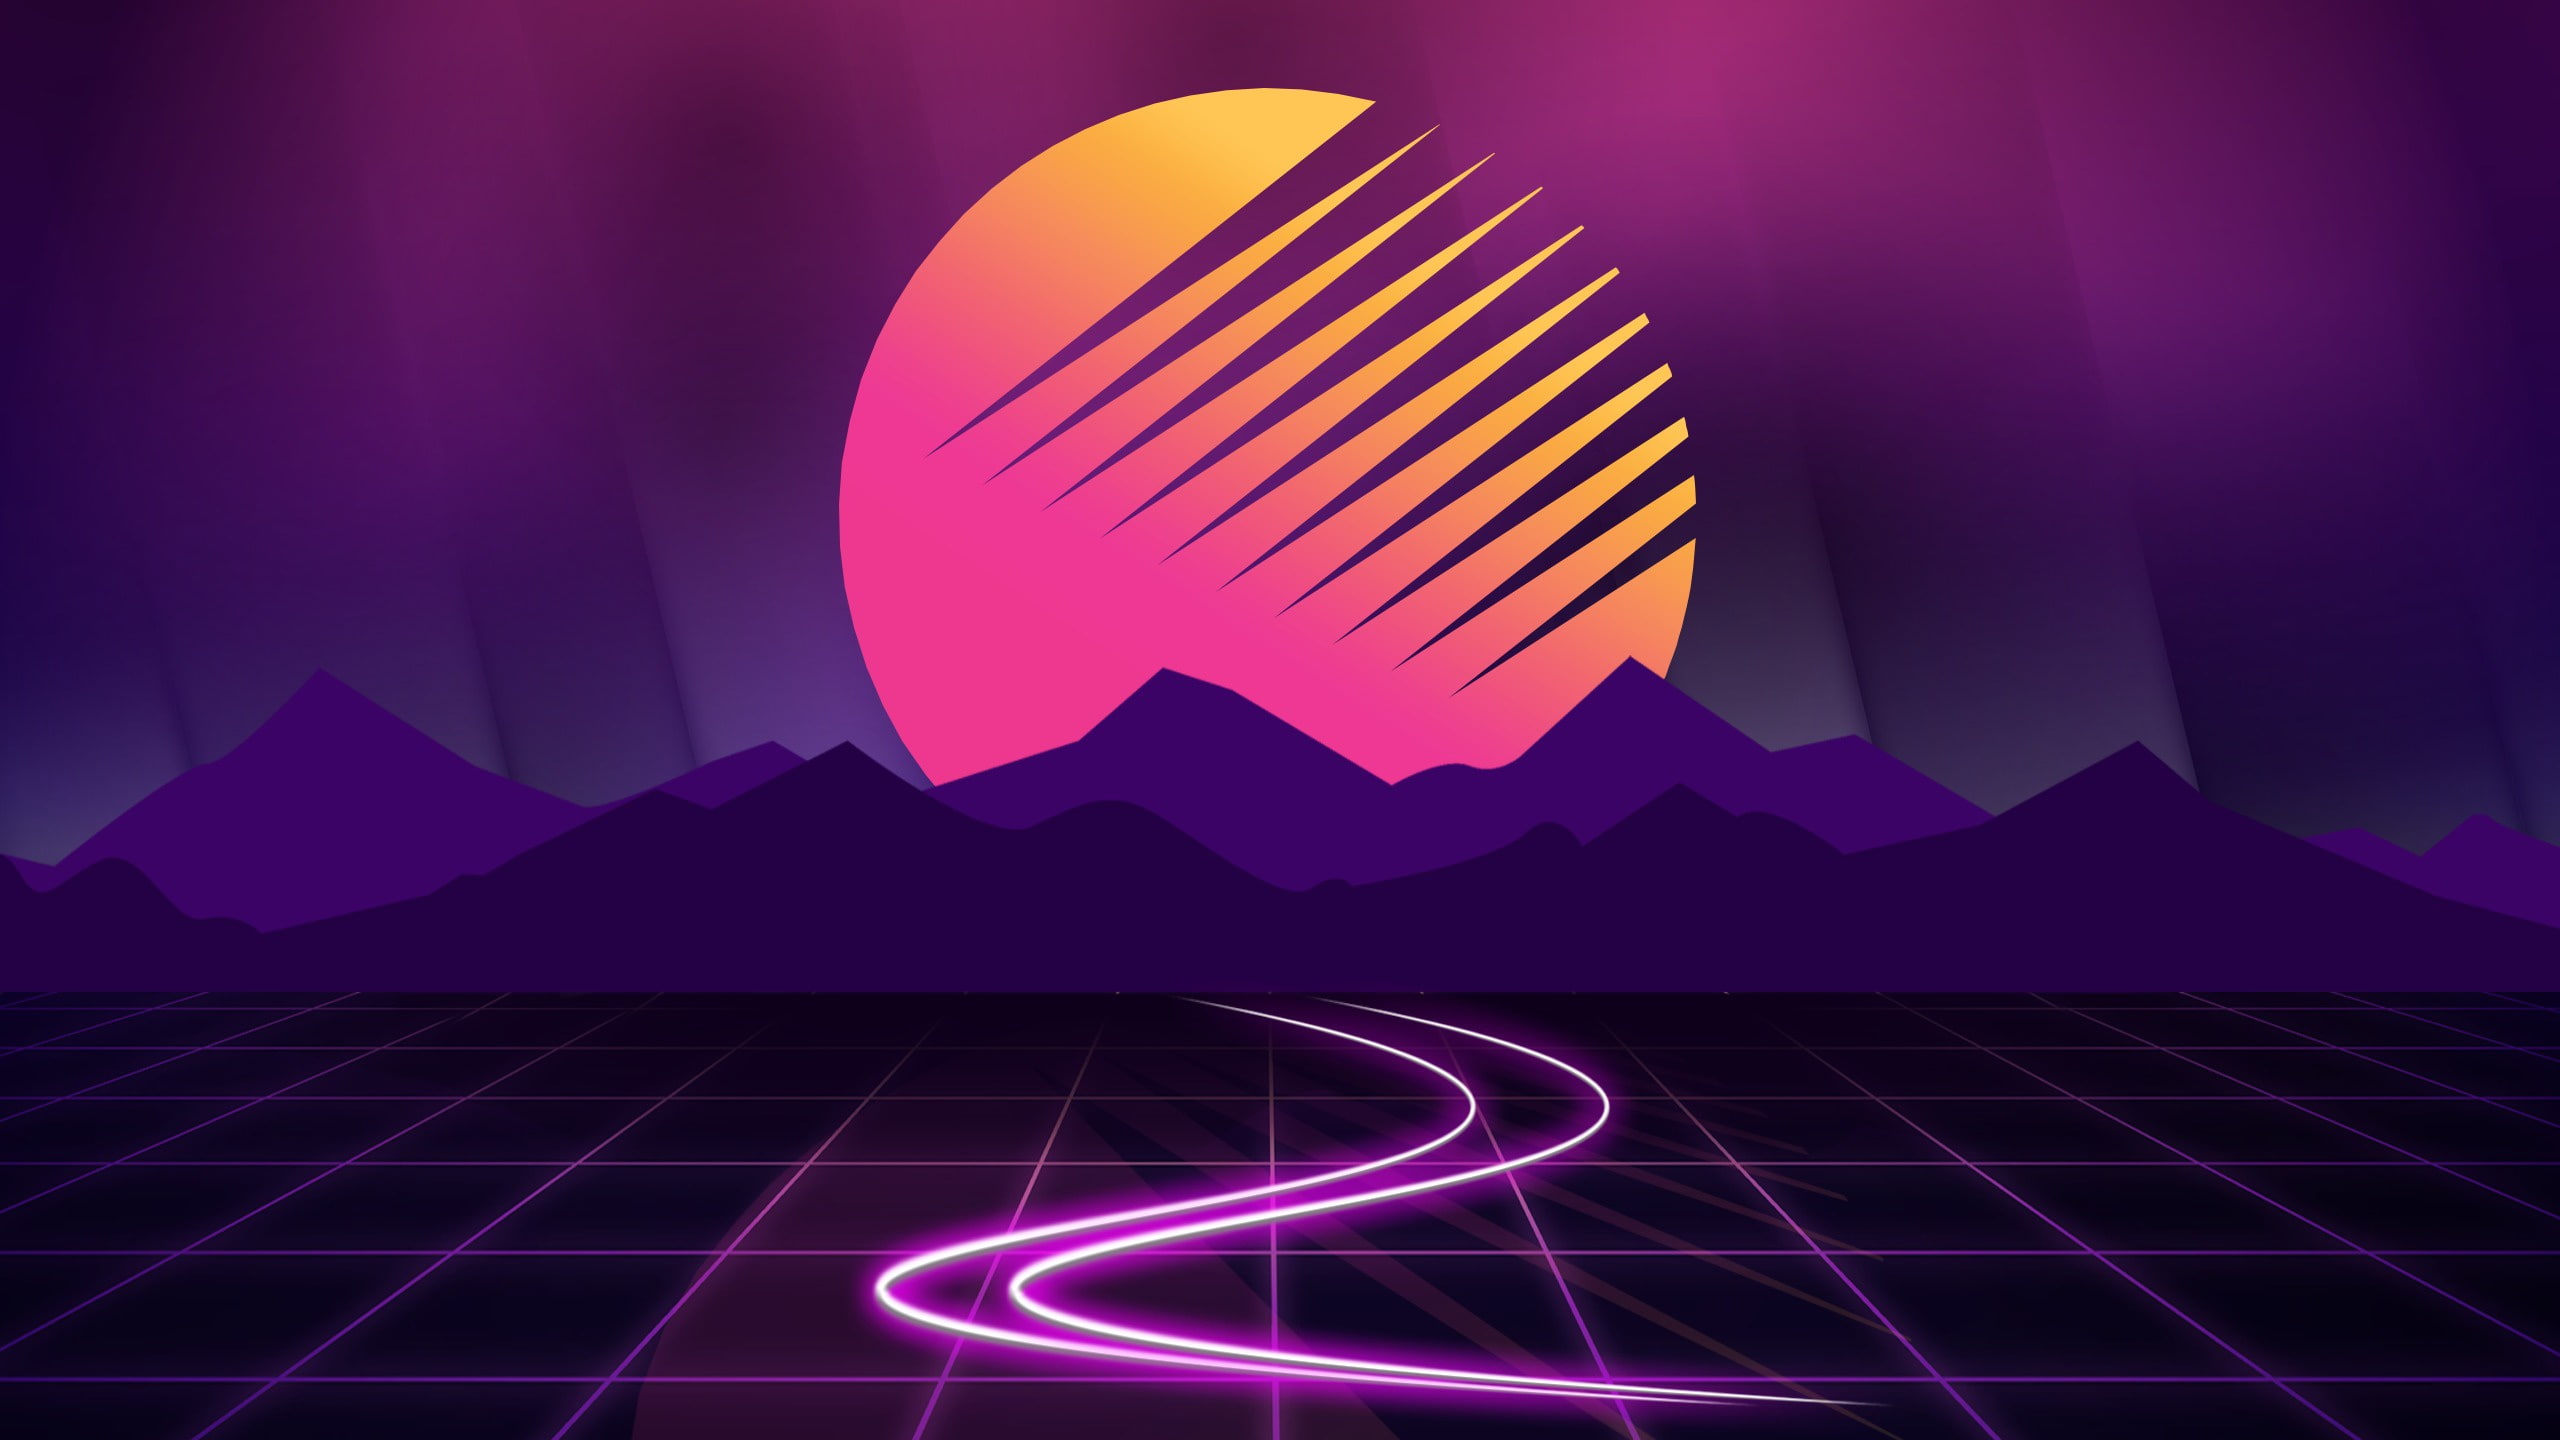 The sun, Mountains, Music, Star, Background, Art, 80s, 80's